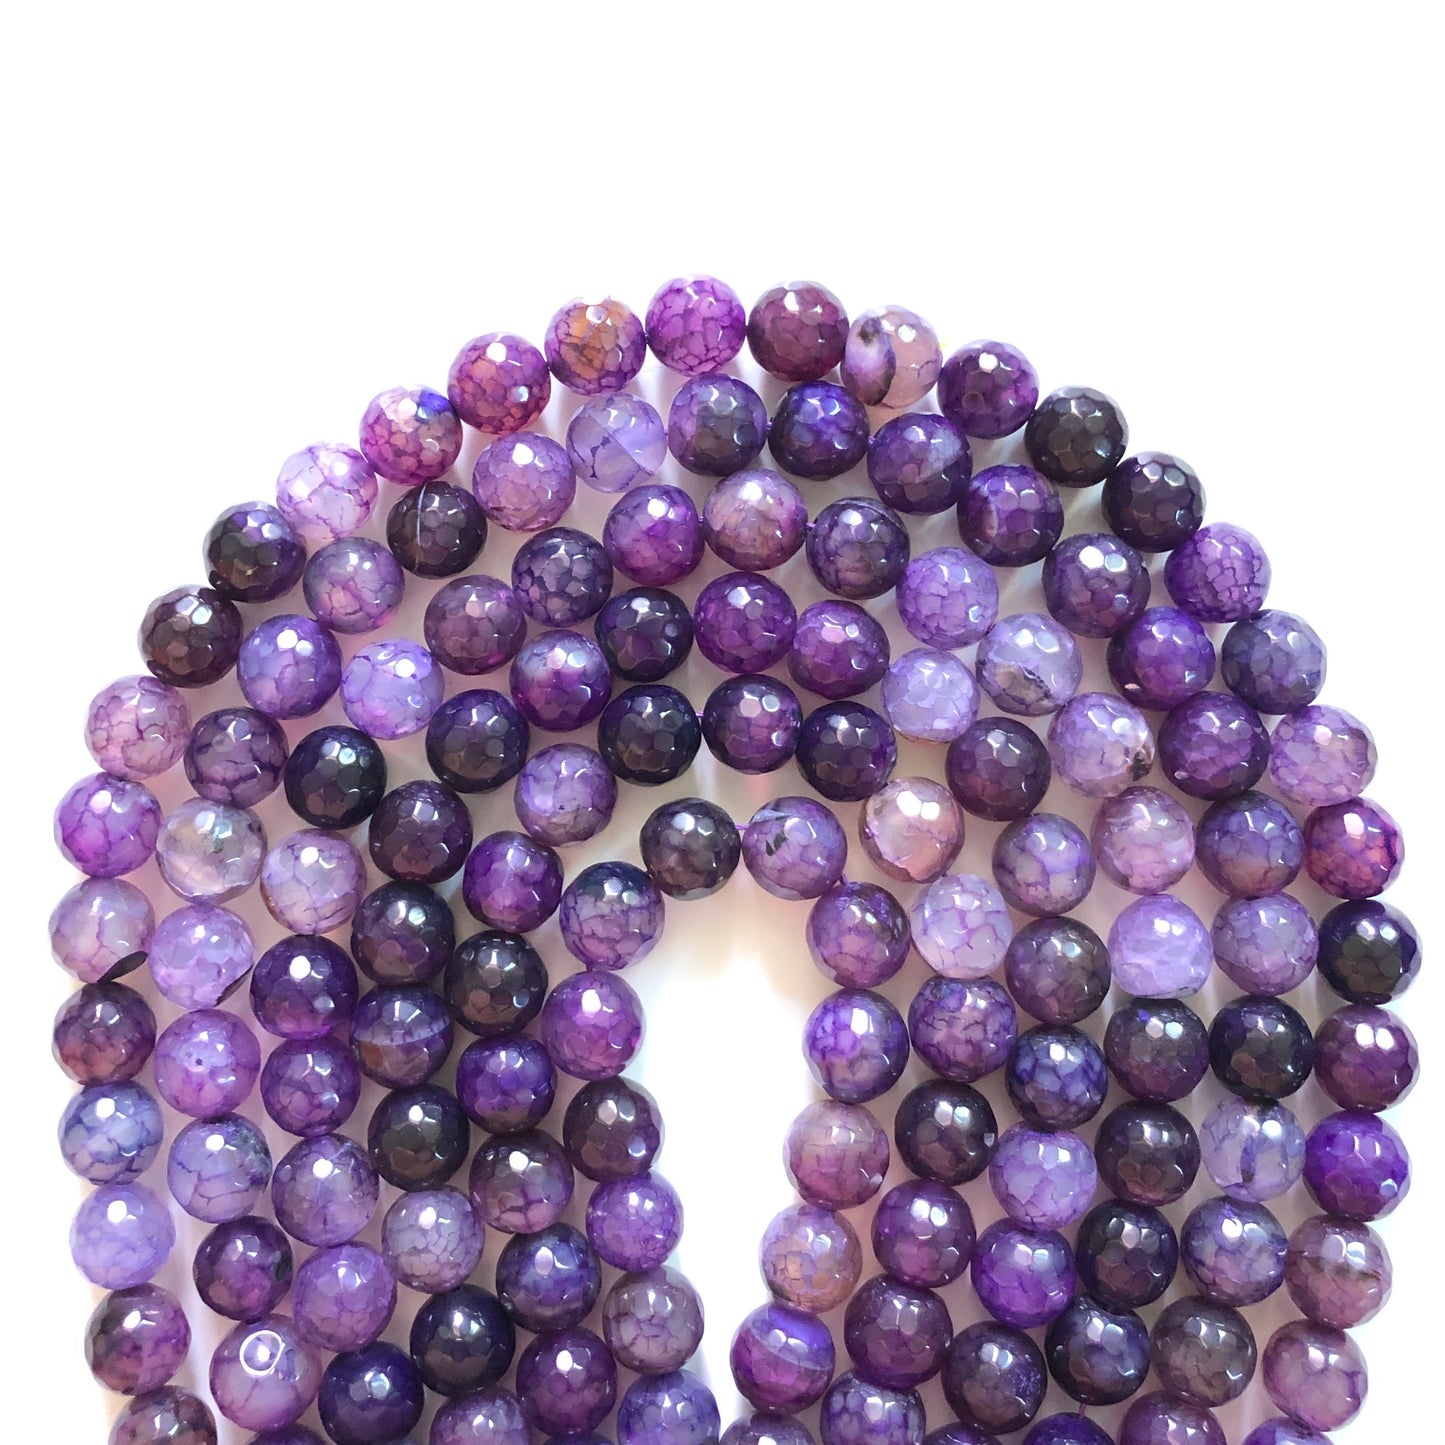 2 Strands/lot 12mm Purple Faceted Dragon Agate Stone Beads Stone Beads 12mm Stone Beads Faceted Agate Beads Charms Beads Beyond